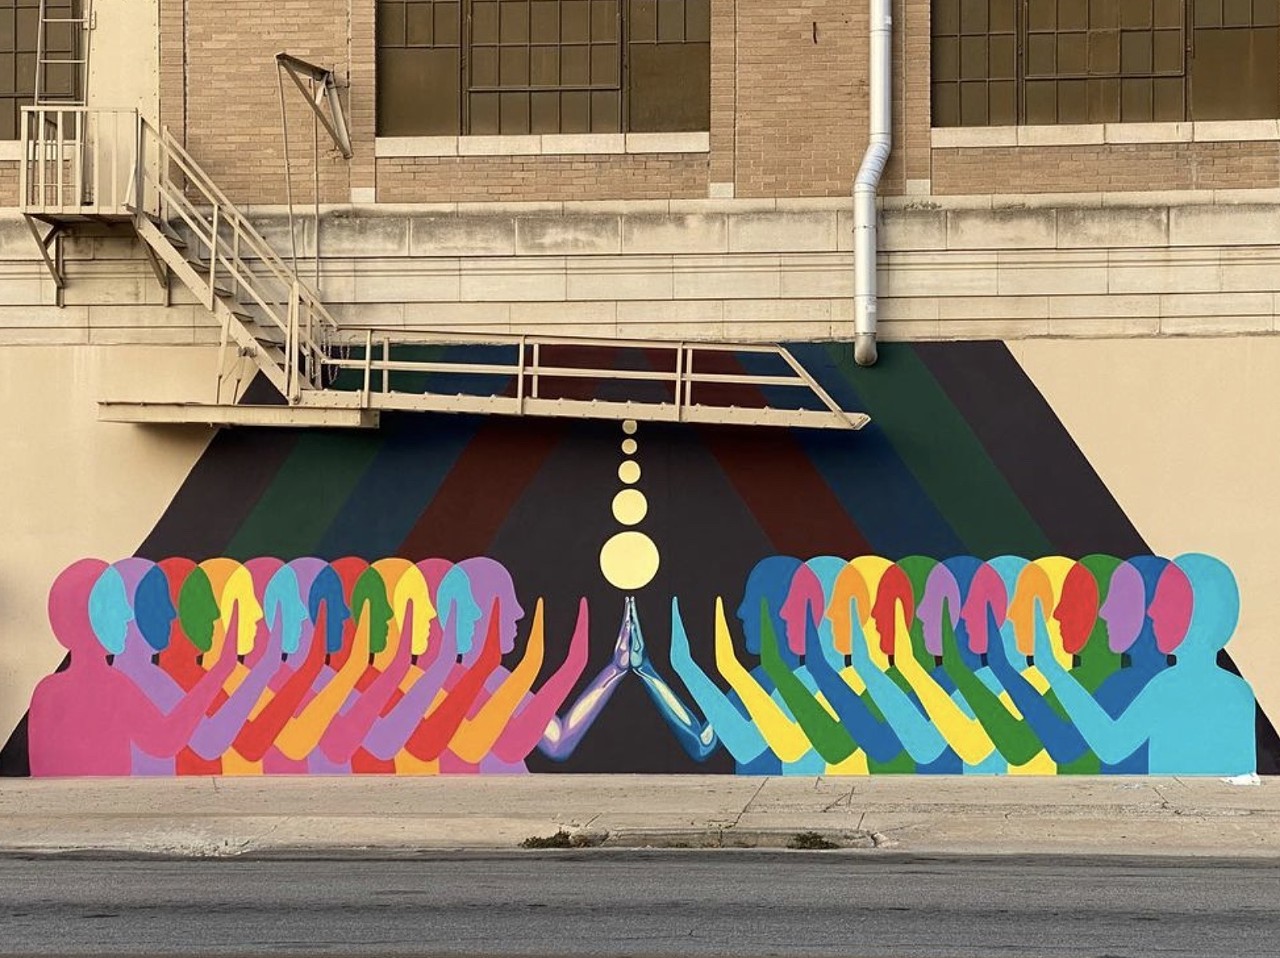 Touch
Herweck's Art Supply, 300 Broadway
Artist: Suzy González
You can draw inspiration from Suzy González's vibrant mural Touch then get supplies at Herweck's to make art of your own.